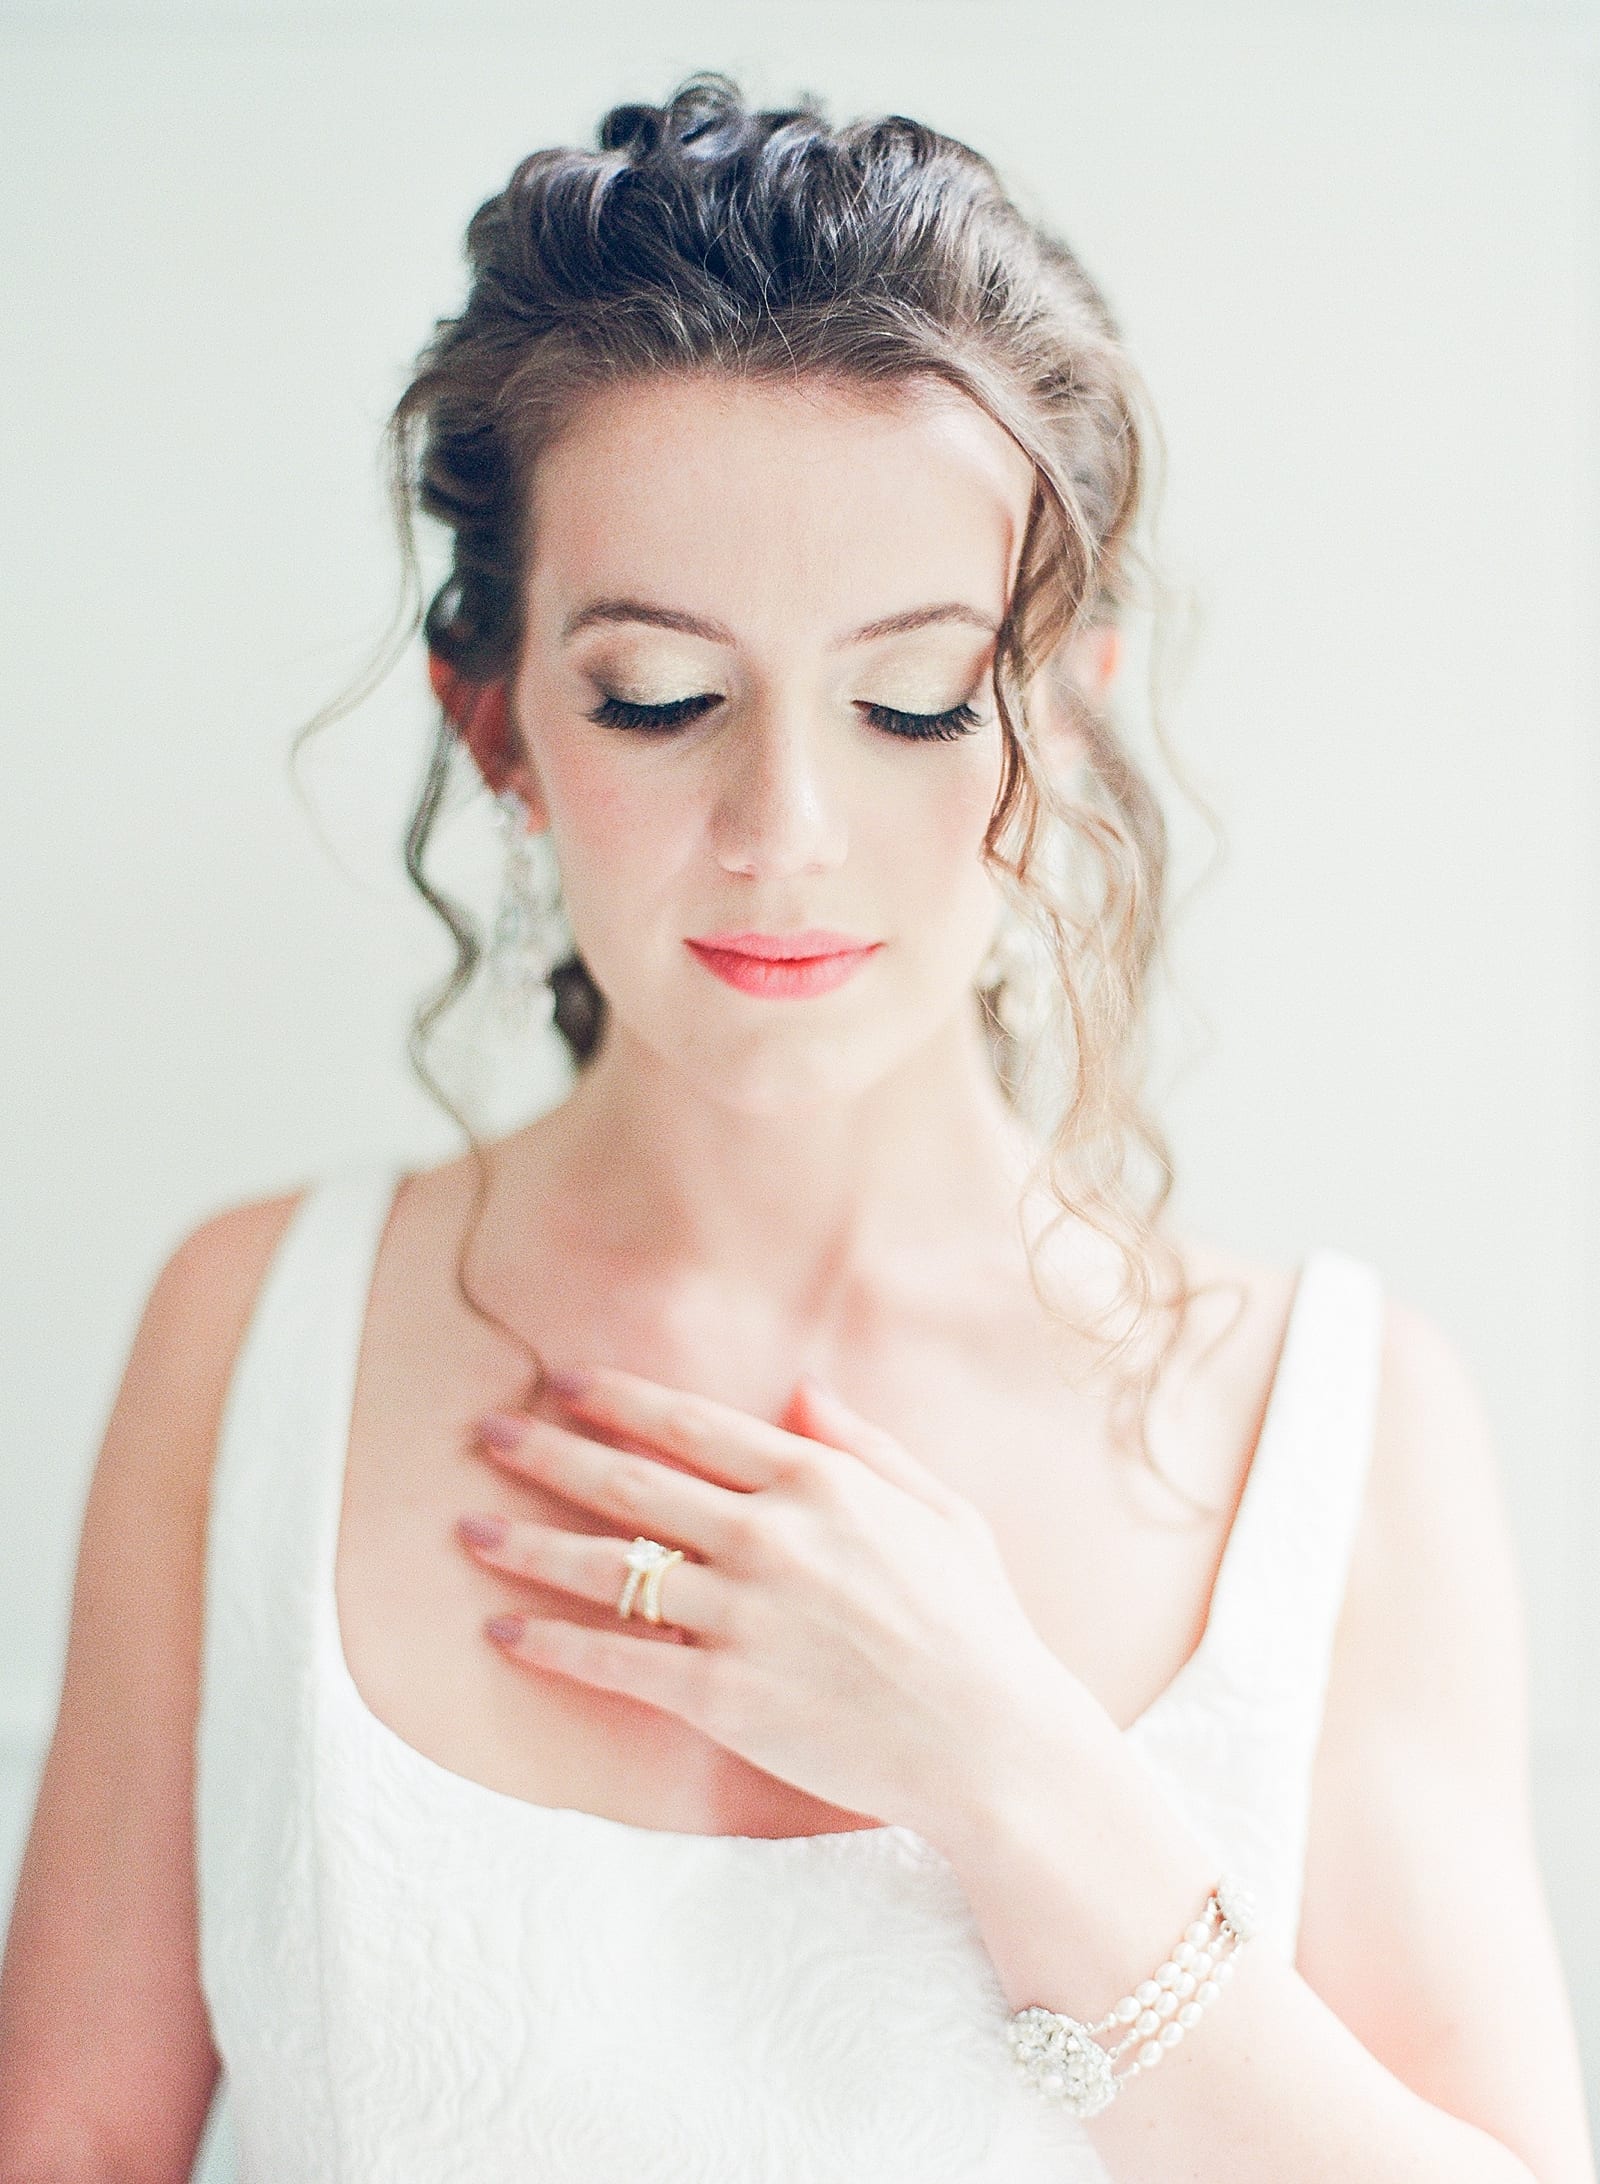 Bridal Portraits Bride Looking Down with Hand on Chest Photo